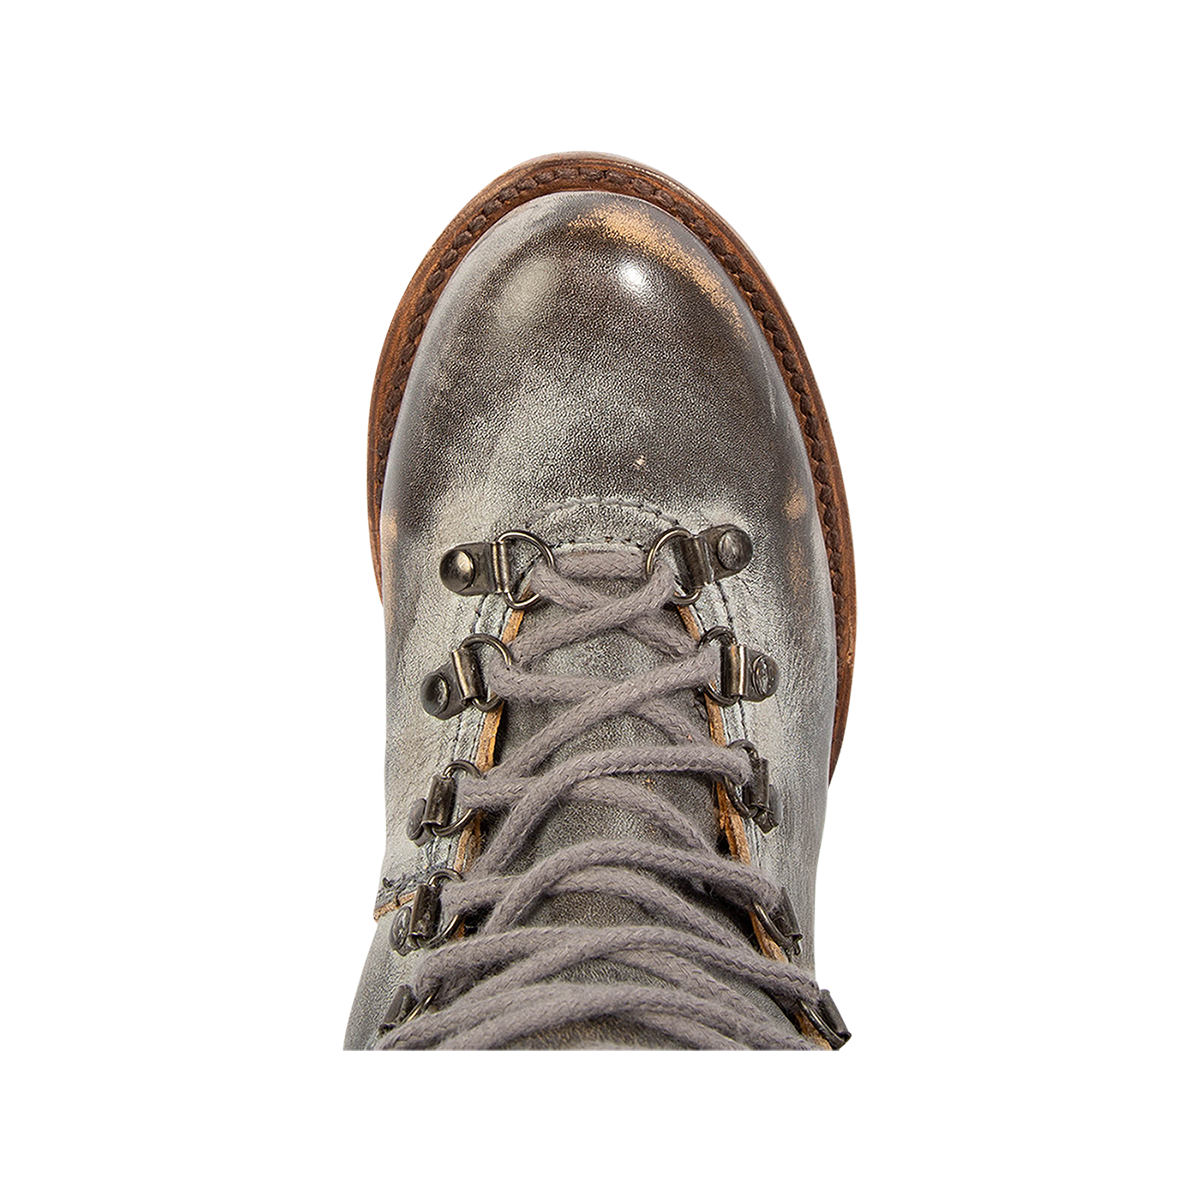 Top view showing lace up detailing and metal hardware on FREEBIRD women's Raphael ice boot